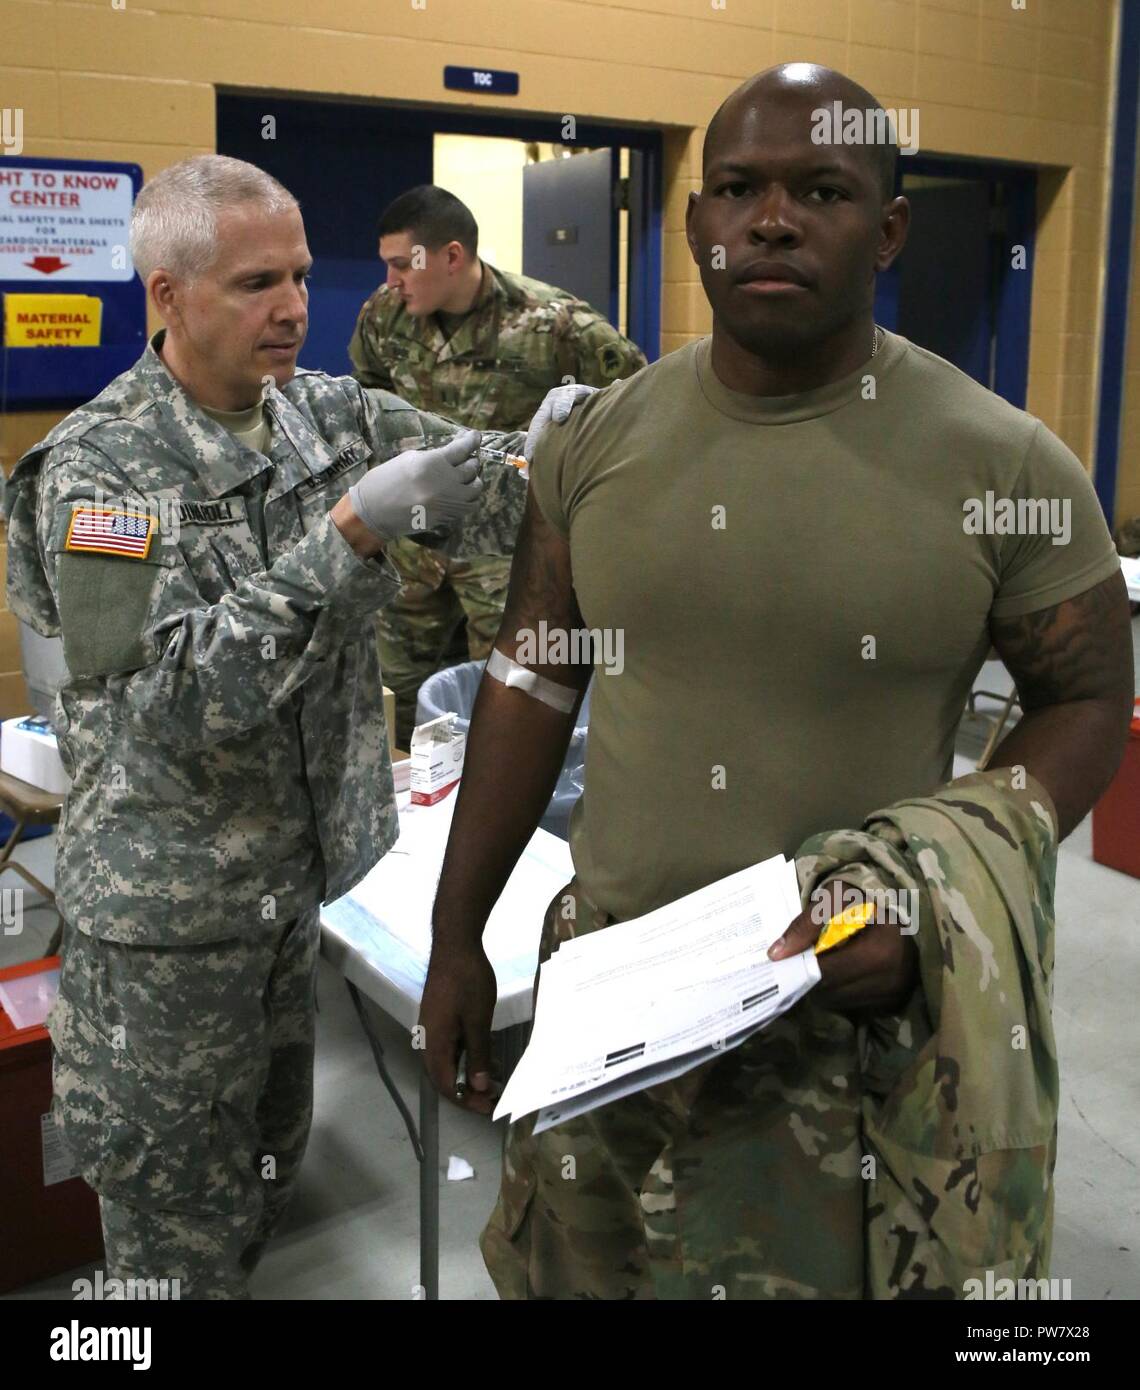 More than 150 Puerto Rico-bound New Jersey Army National Guard Soldiers  underwent pre-mobilization processing on Oct. 1 at the National Guard  armory in Sea Girt, N.J. The Soldiers will be assisting civil